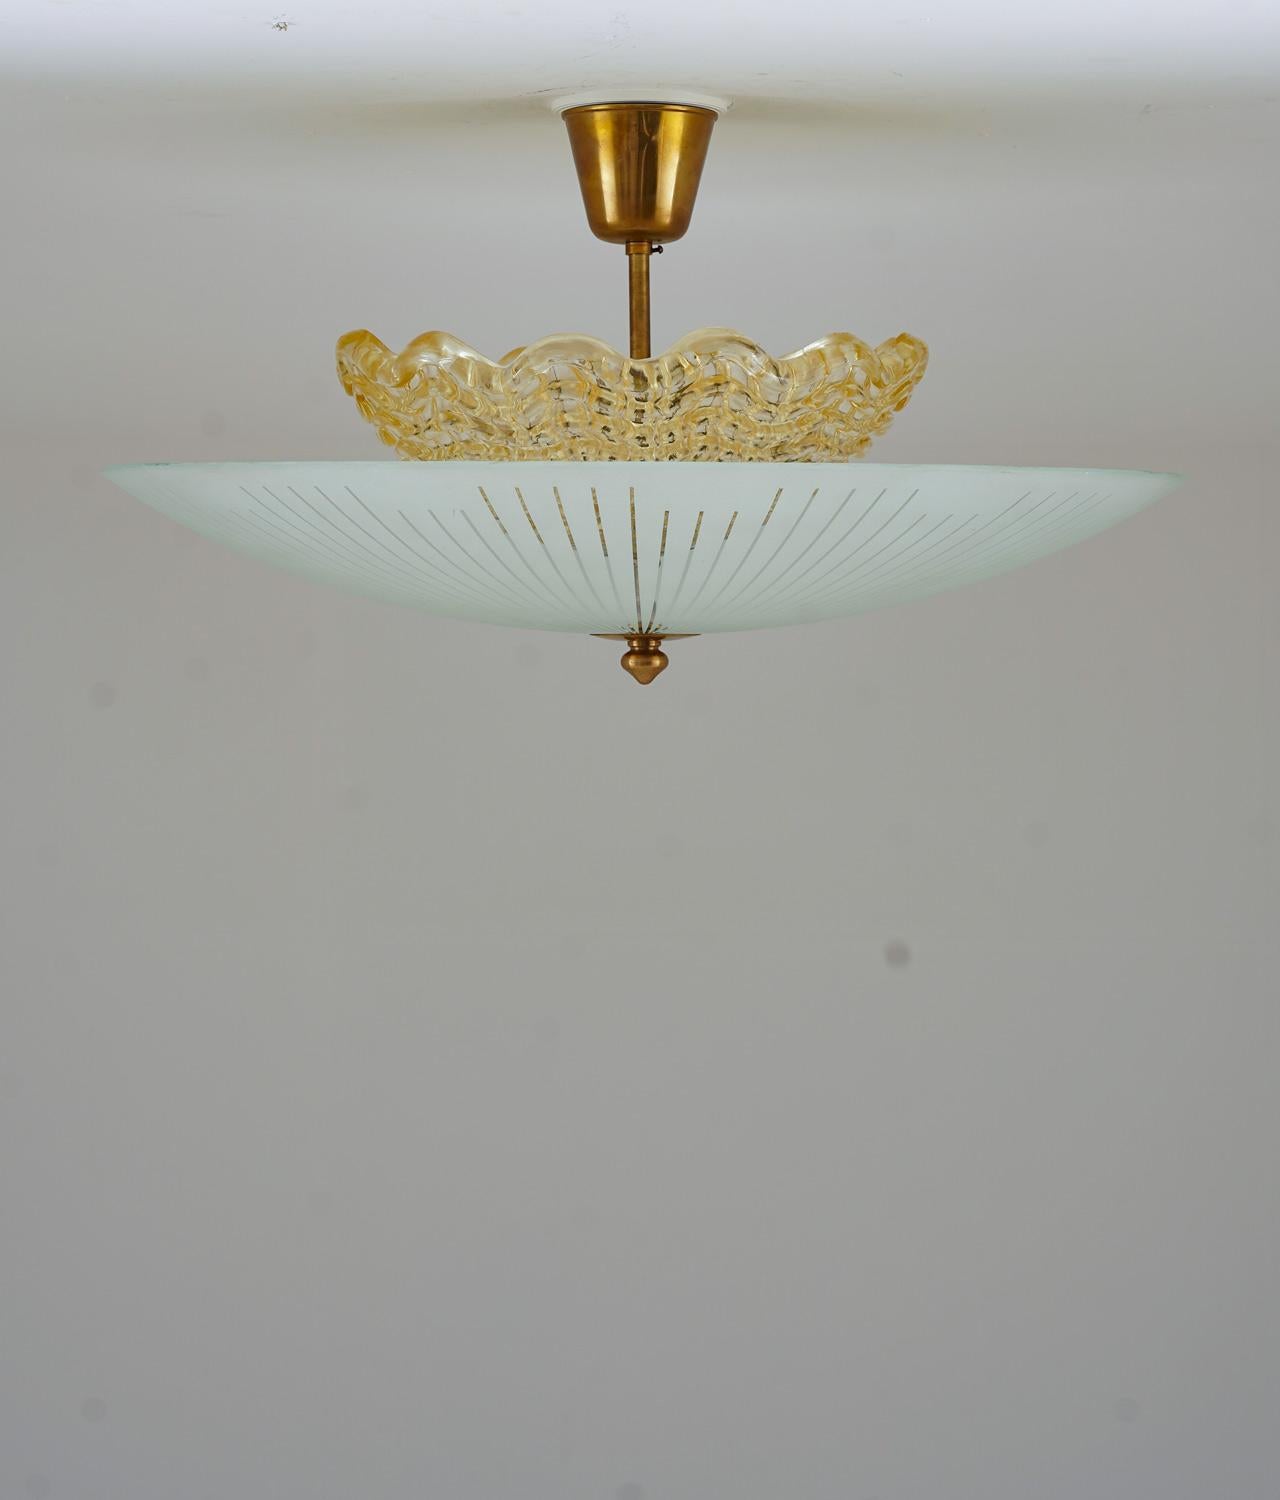 Beautiful flush mount in brass and frosted glass, produced by Orrefors in Sweden circa 1950.
The lamp consists of an amber-colored inner shade, hiding three light bulbs. The inne shade is surrounded by a large outer shade in frosted glass.